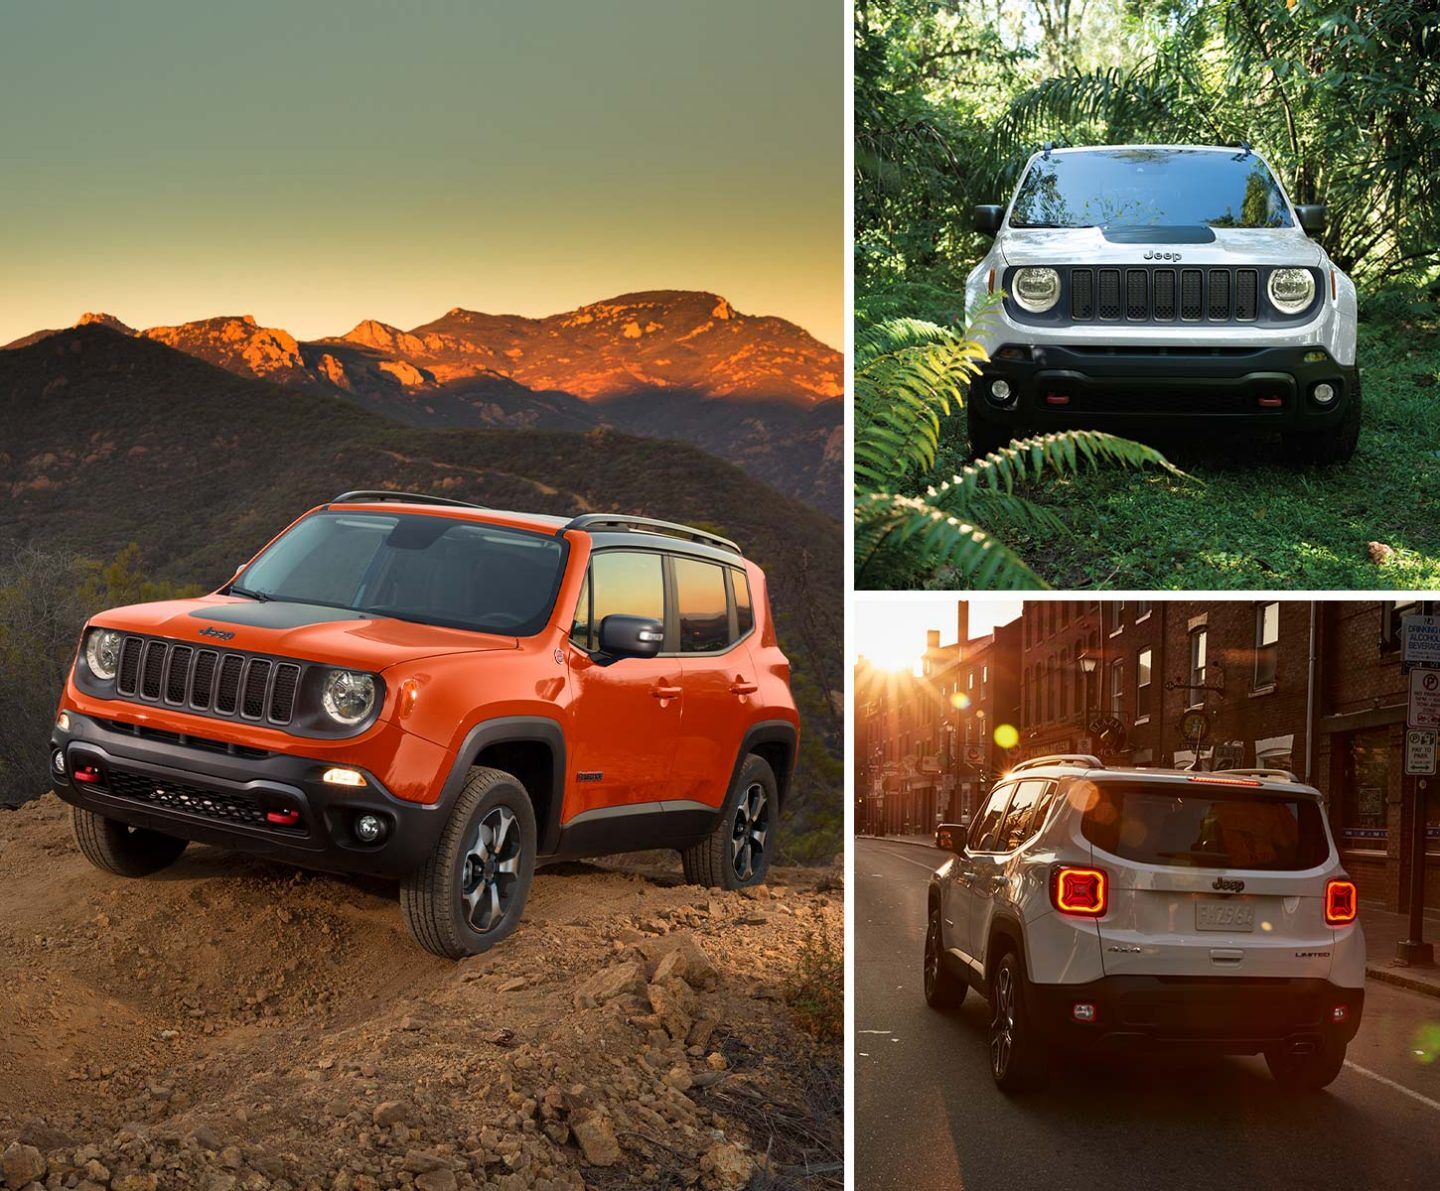 Three 2021 Jeep Renegade models, from different angles: climbing a rocky hill, parked in a lush green forest and being driven on a city street at sunset.